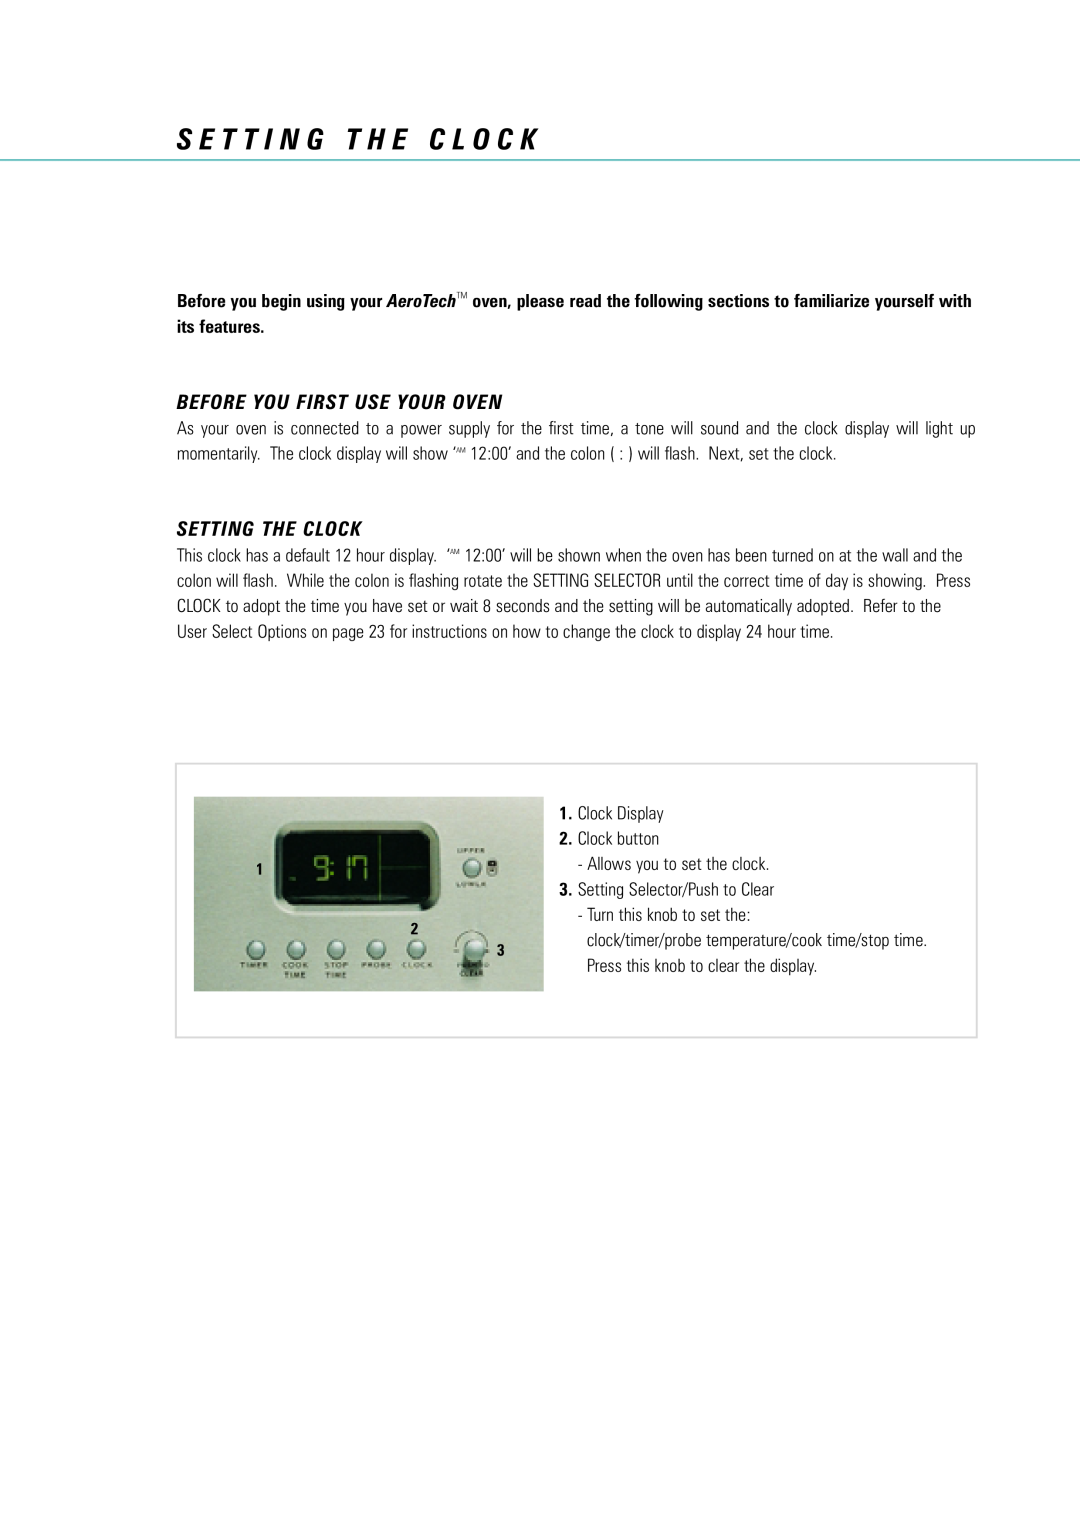 Fisher & Paykel AeroTech manual S E T T I N G T H E C L O C K, Before You First Use Your Oven, Setting The Clock 